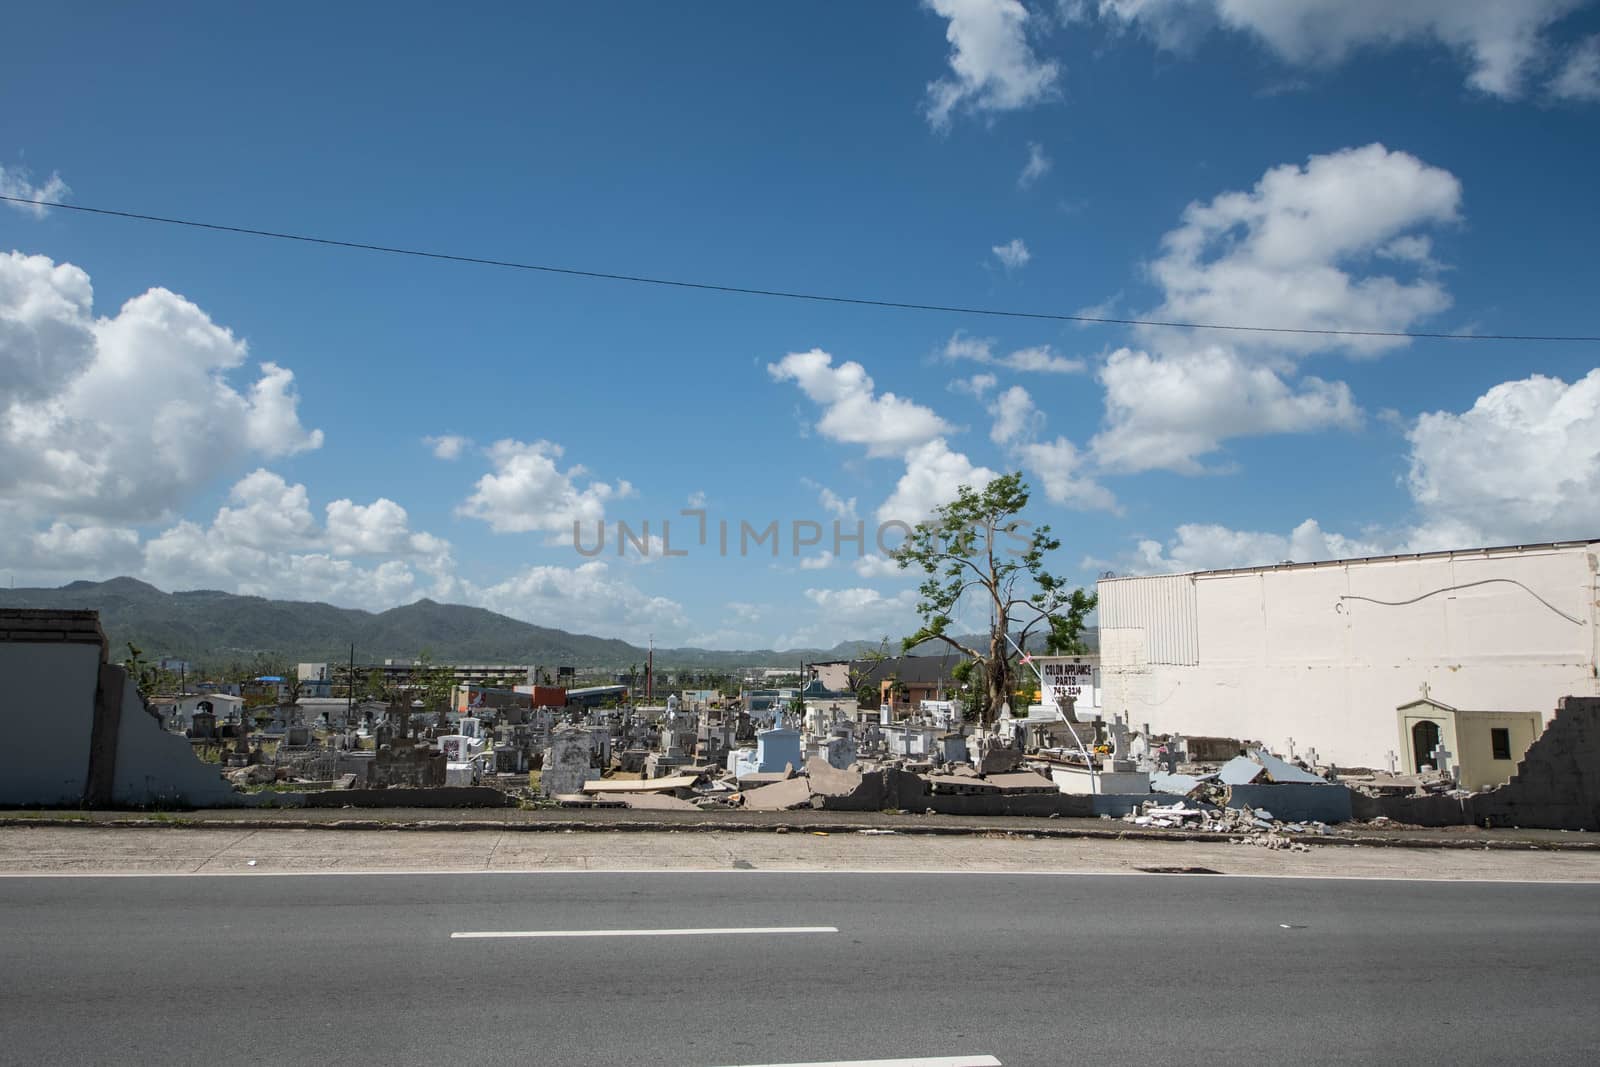 Cemetery wall collapsed from the force of Hurricane Maria's winds.